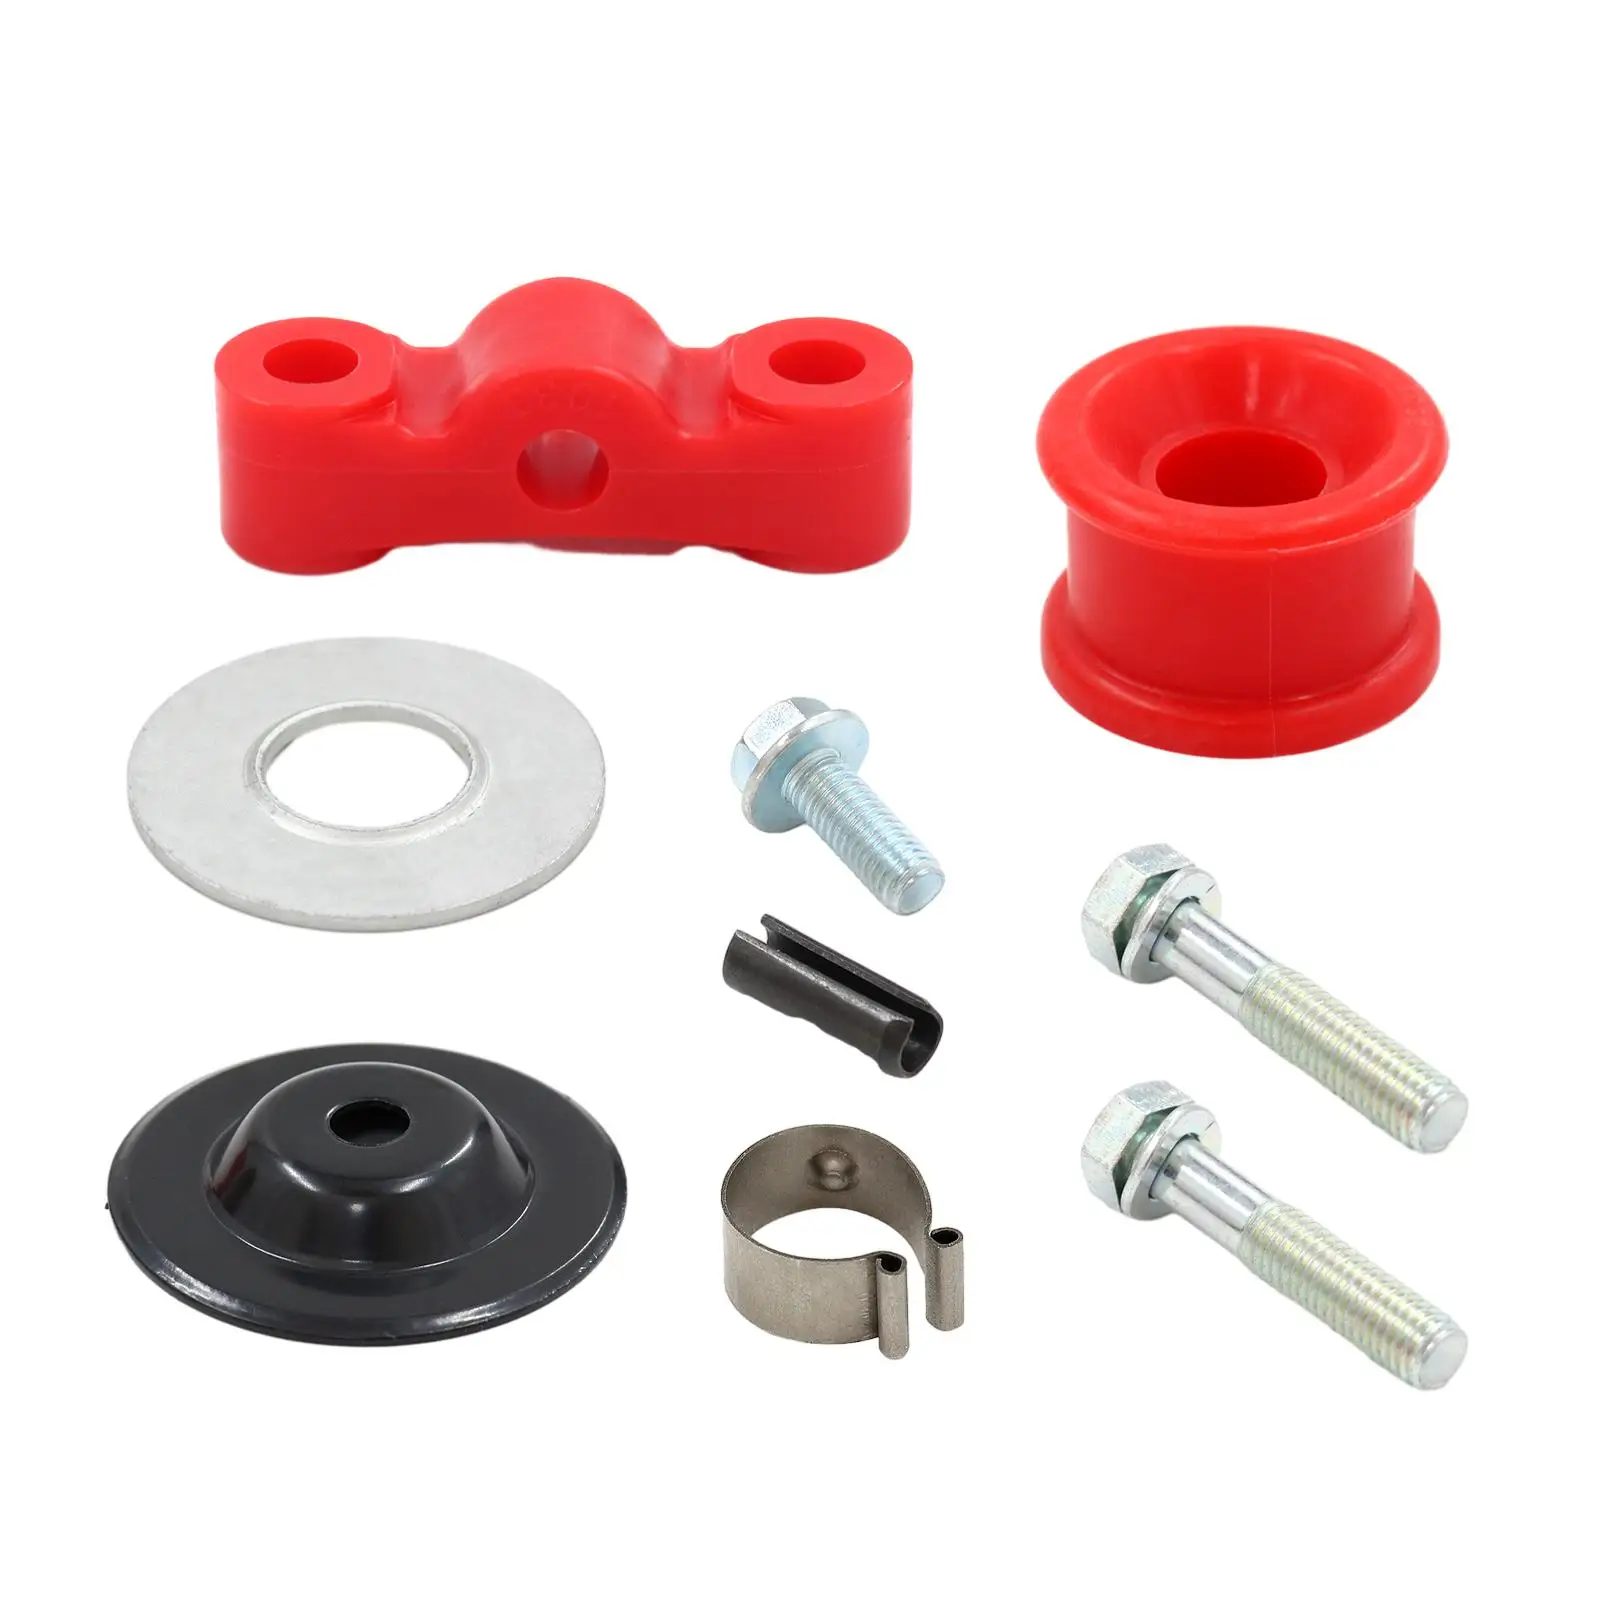 Red Shift Linkage Bushings Kit Durable C Clip and Bolt for Honda Crx Civic Stable Performance High Reliability